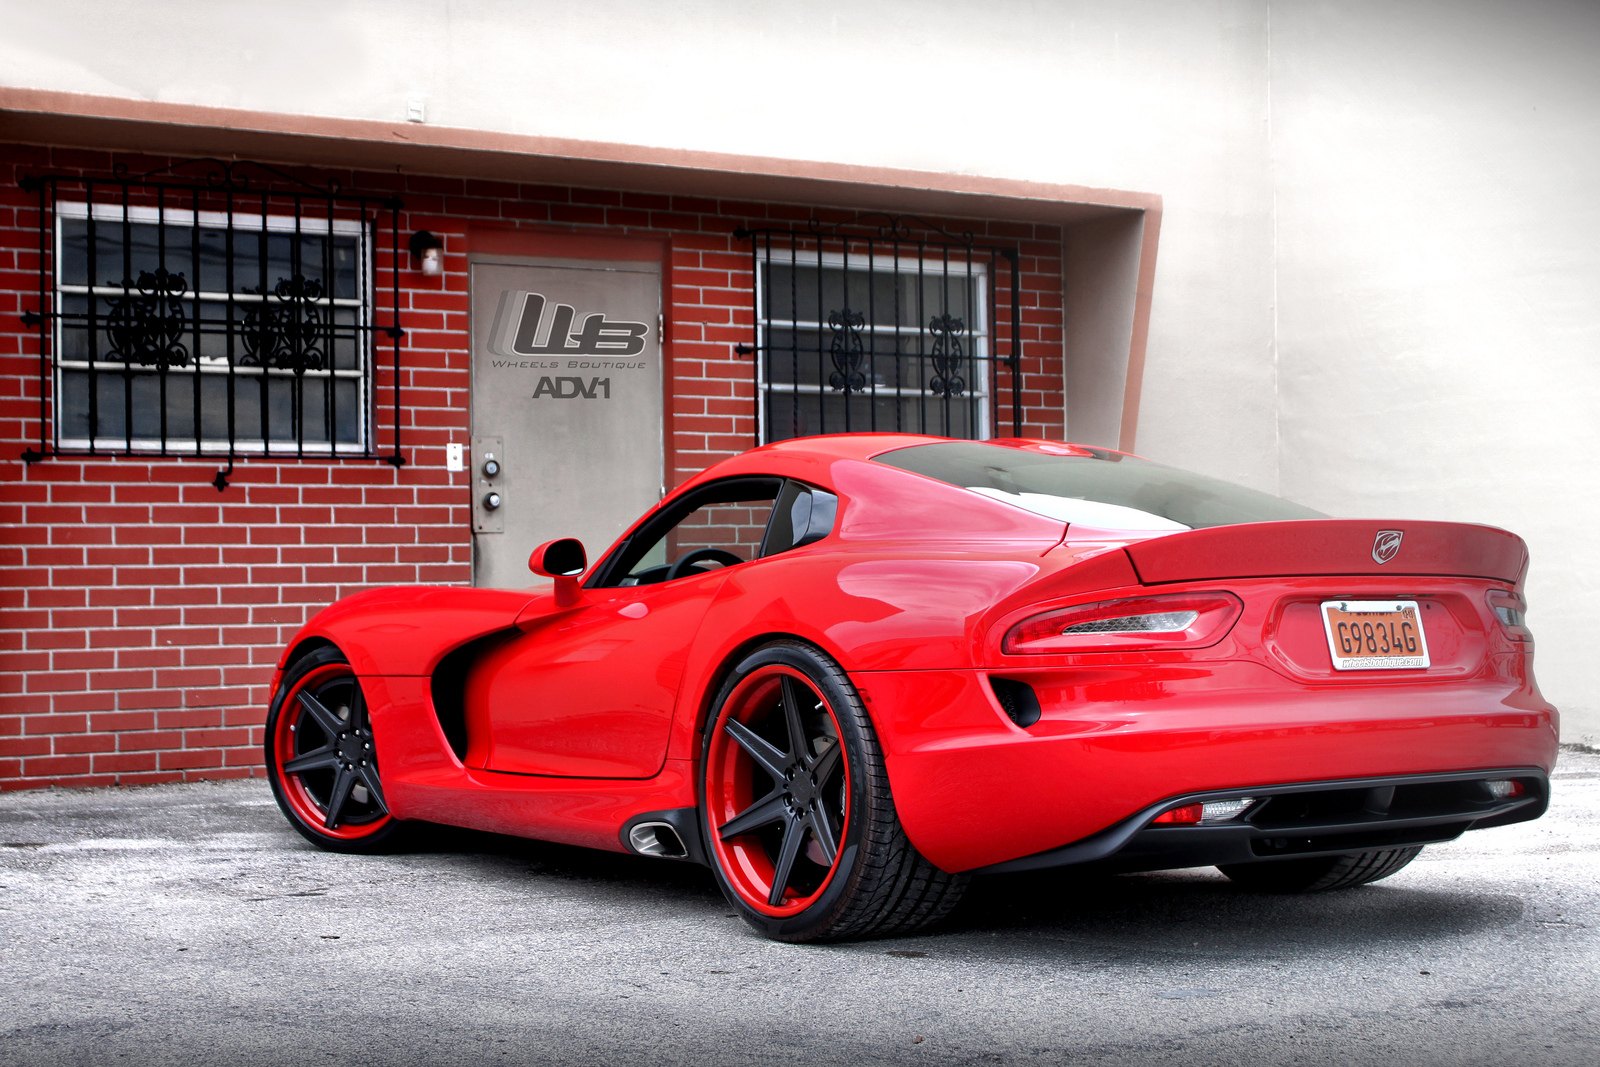 Custom Style Rear Spoiler on Red Dodge Viper - Photo by ADV.1